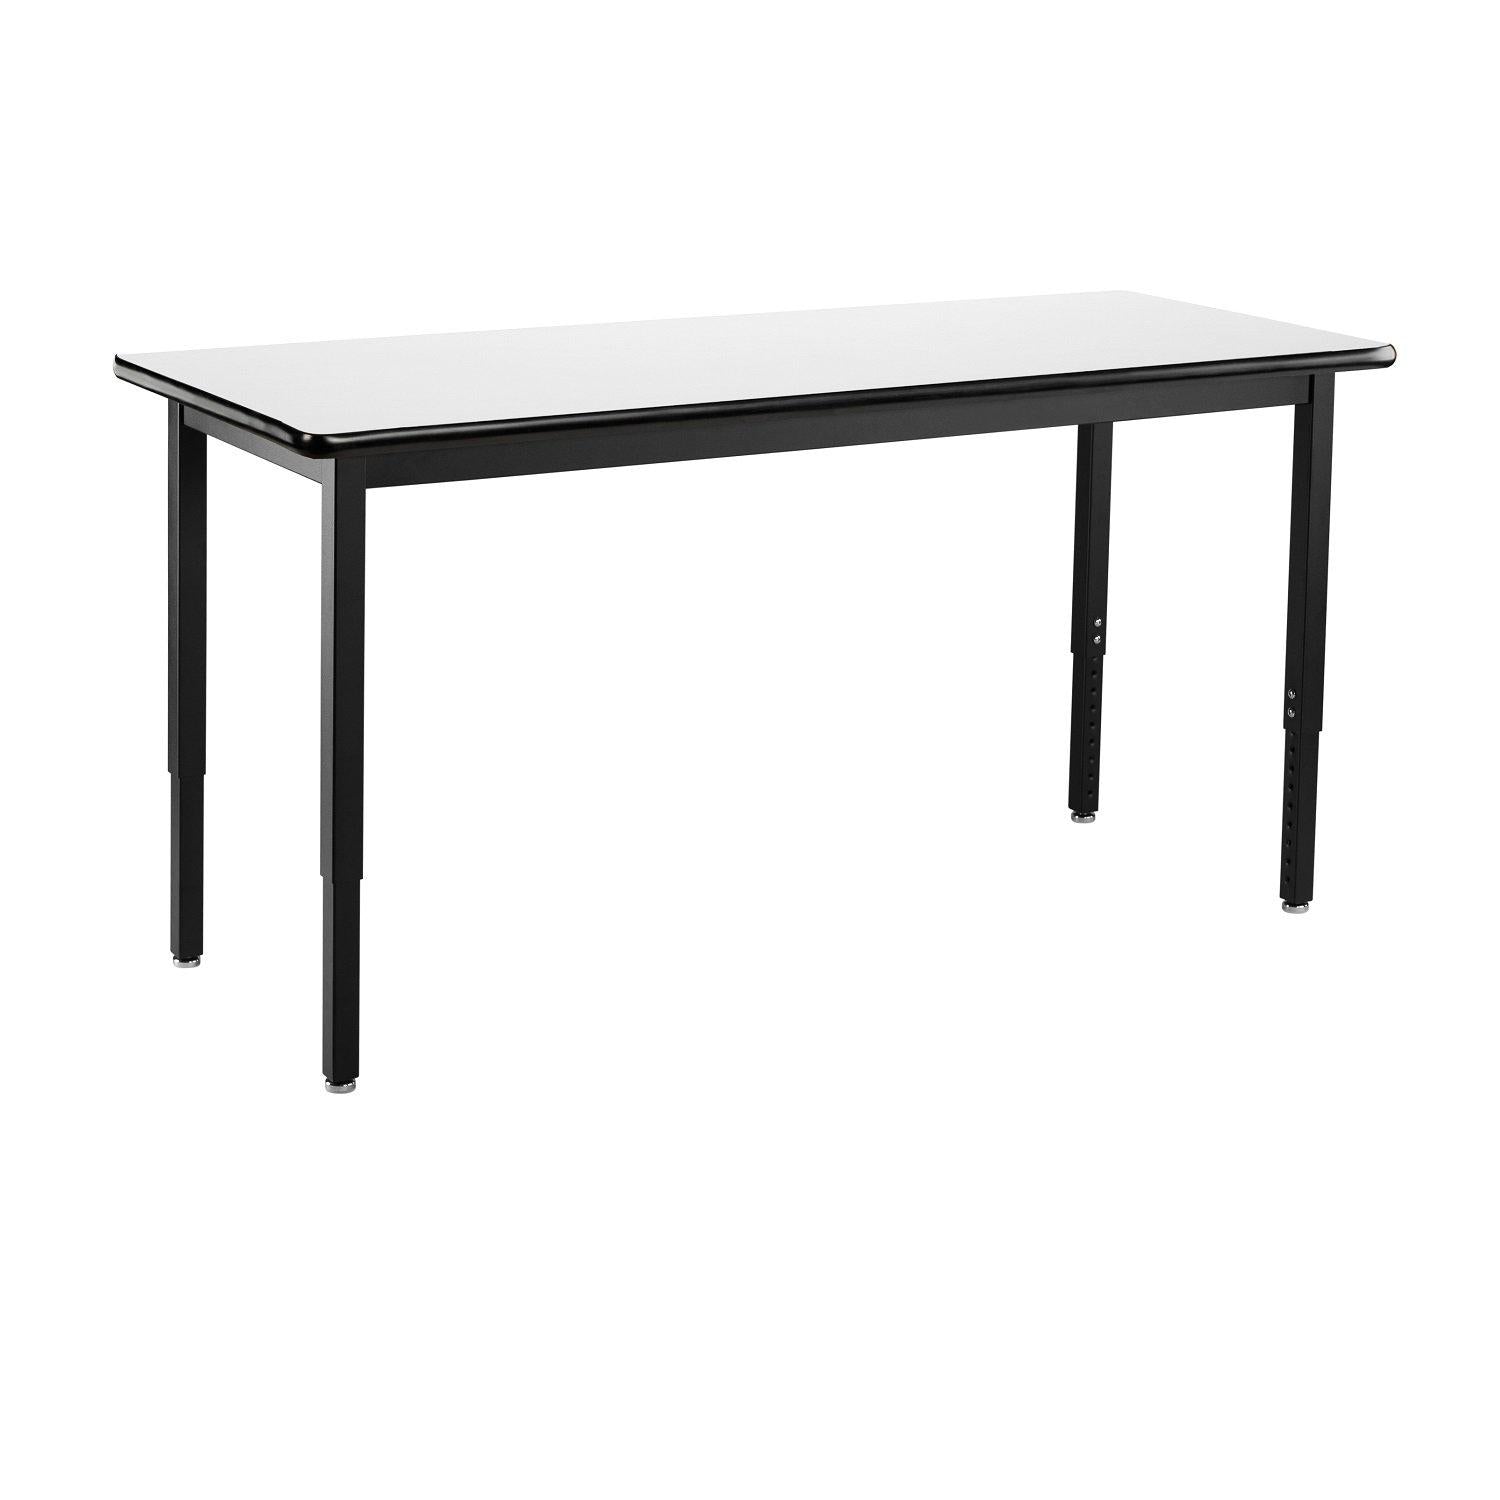 Heavy-Duty Height-Adjustable Utility Table, Black Frame, 30" x 60", Whiteboard High-Pressure Laminate Top